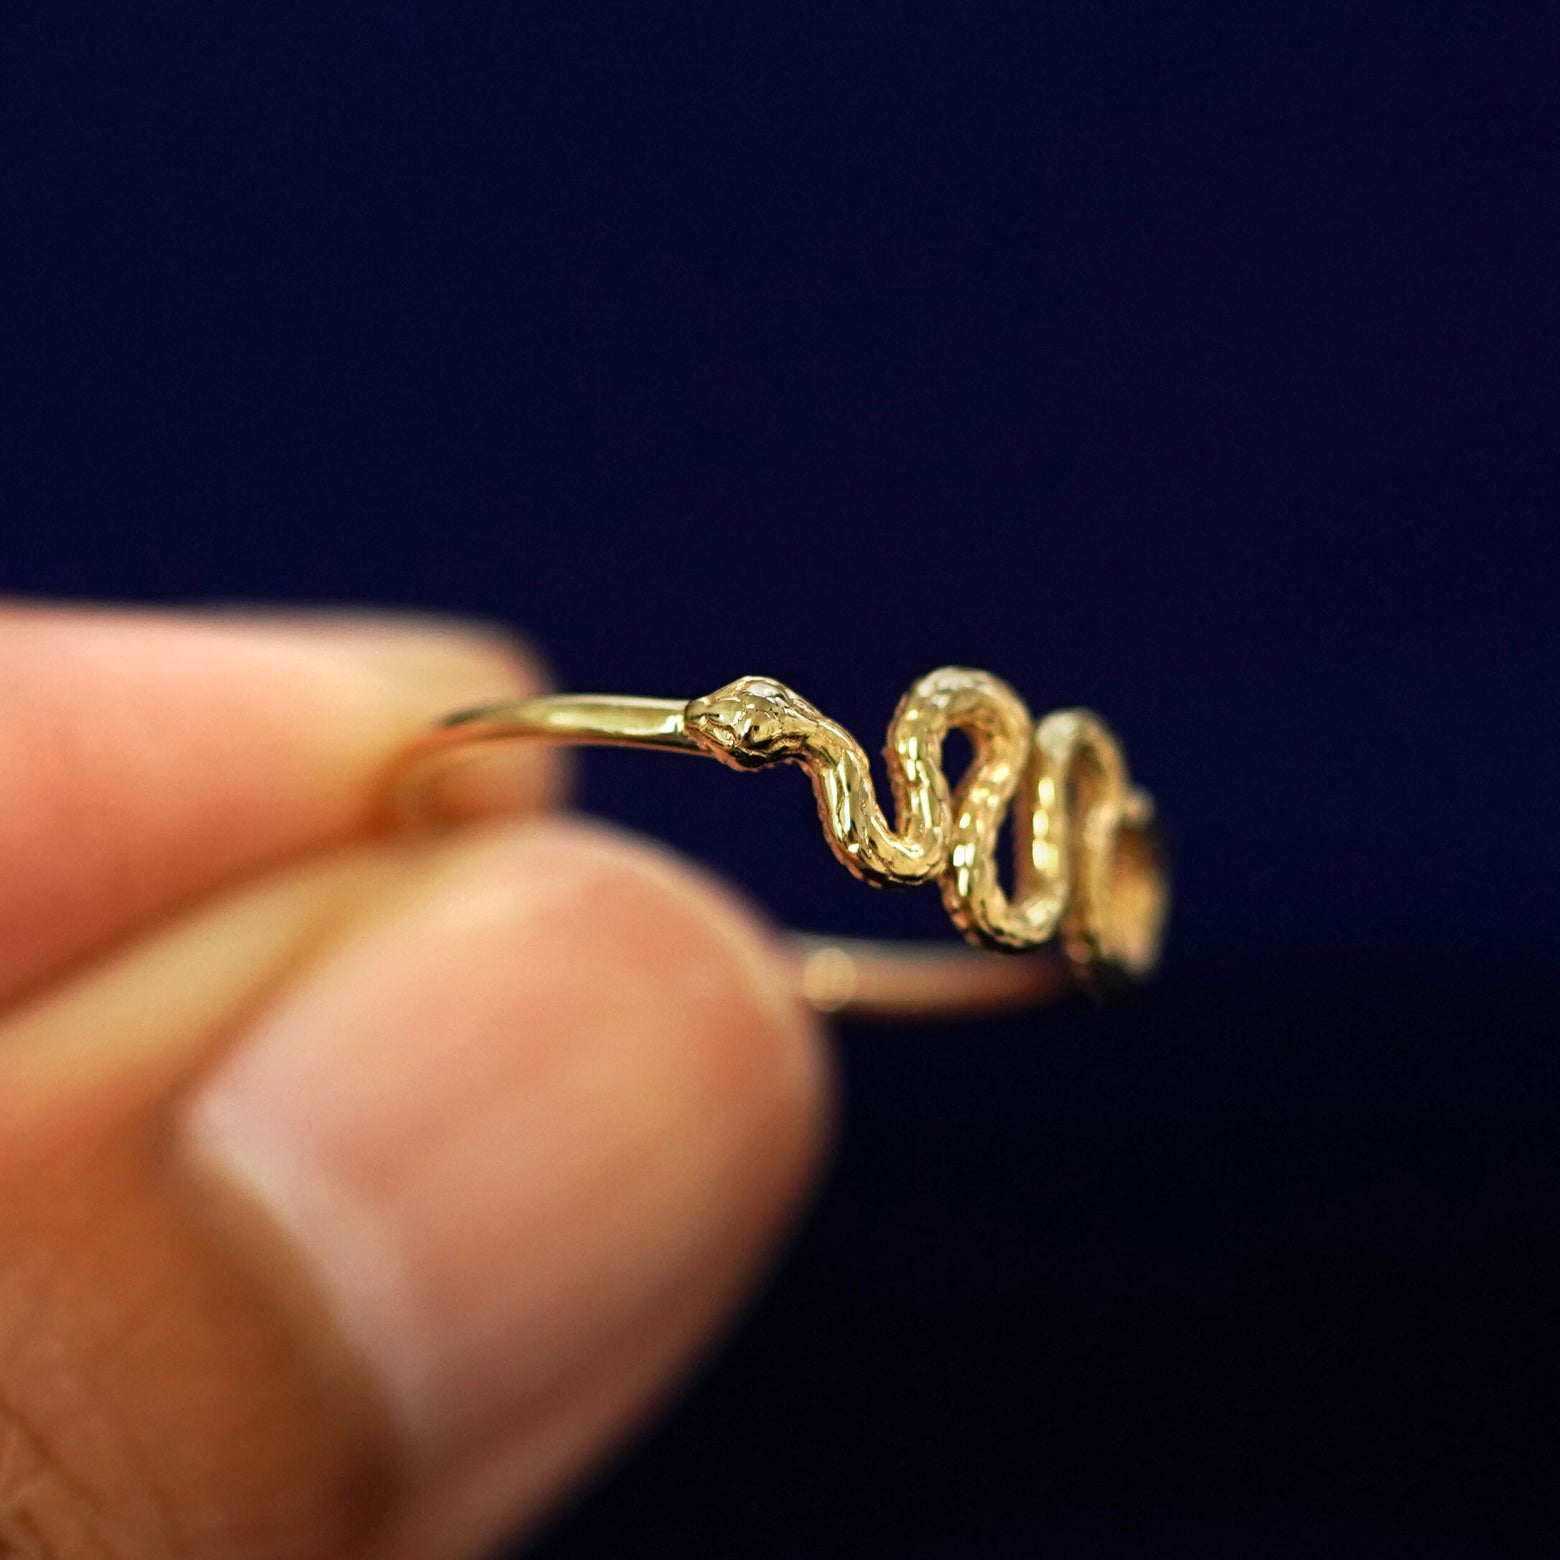 A model holding a Snake Ring tilted to show the details of the snake's head